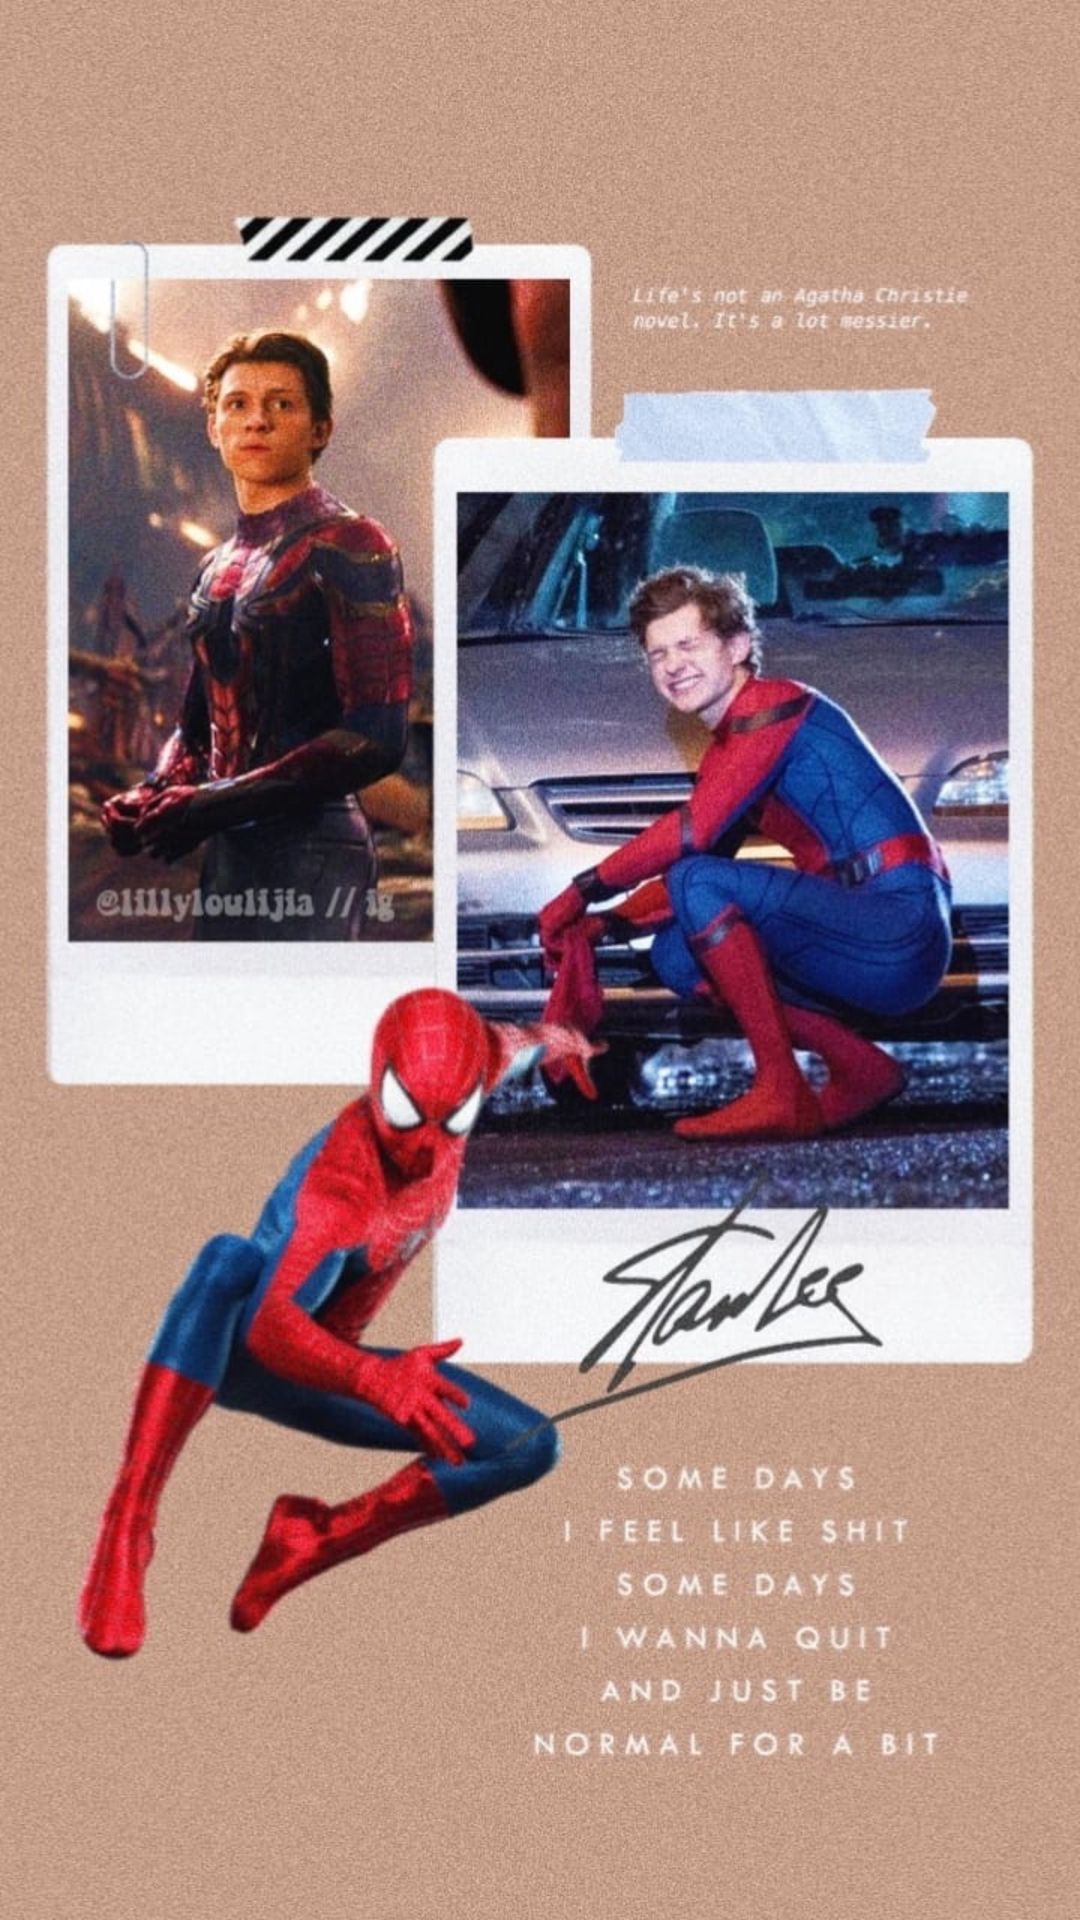 aesthetic wallpaper. requests open - 18. tom holland